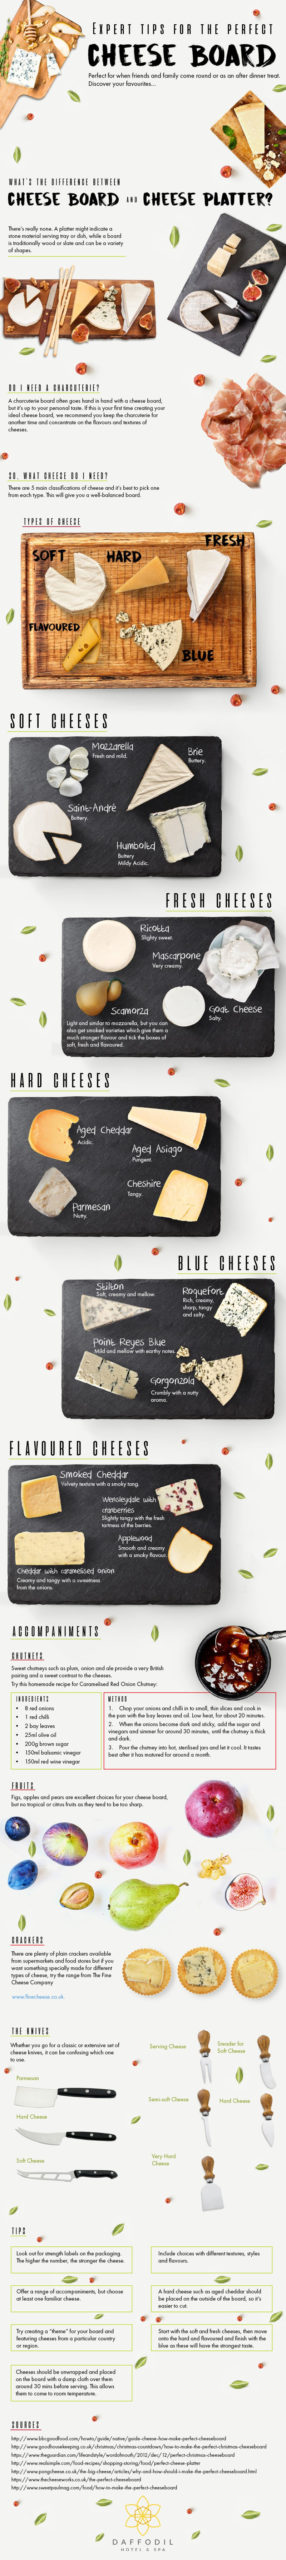 Perfect Cheese Board Infographic